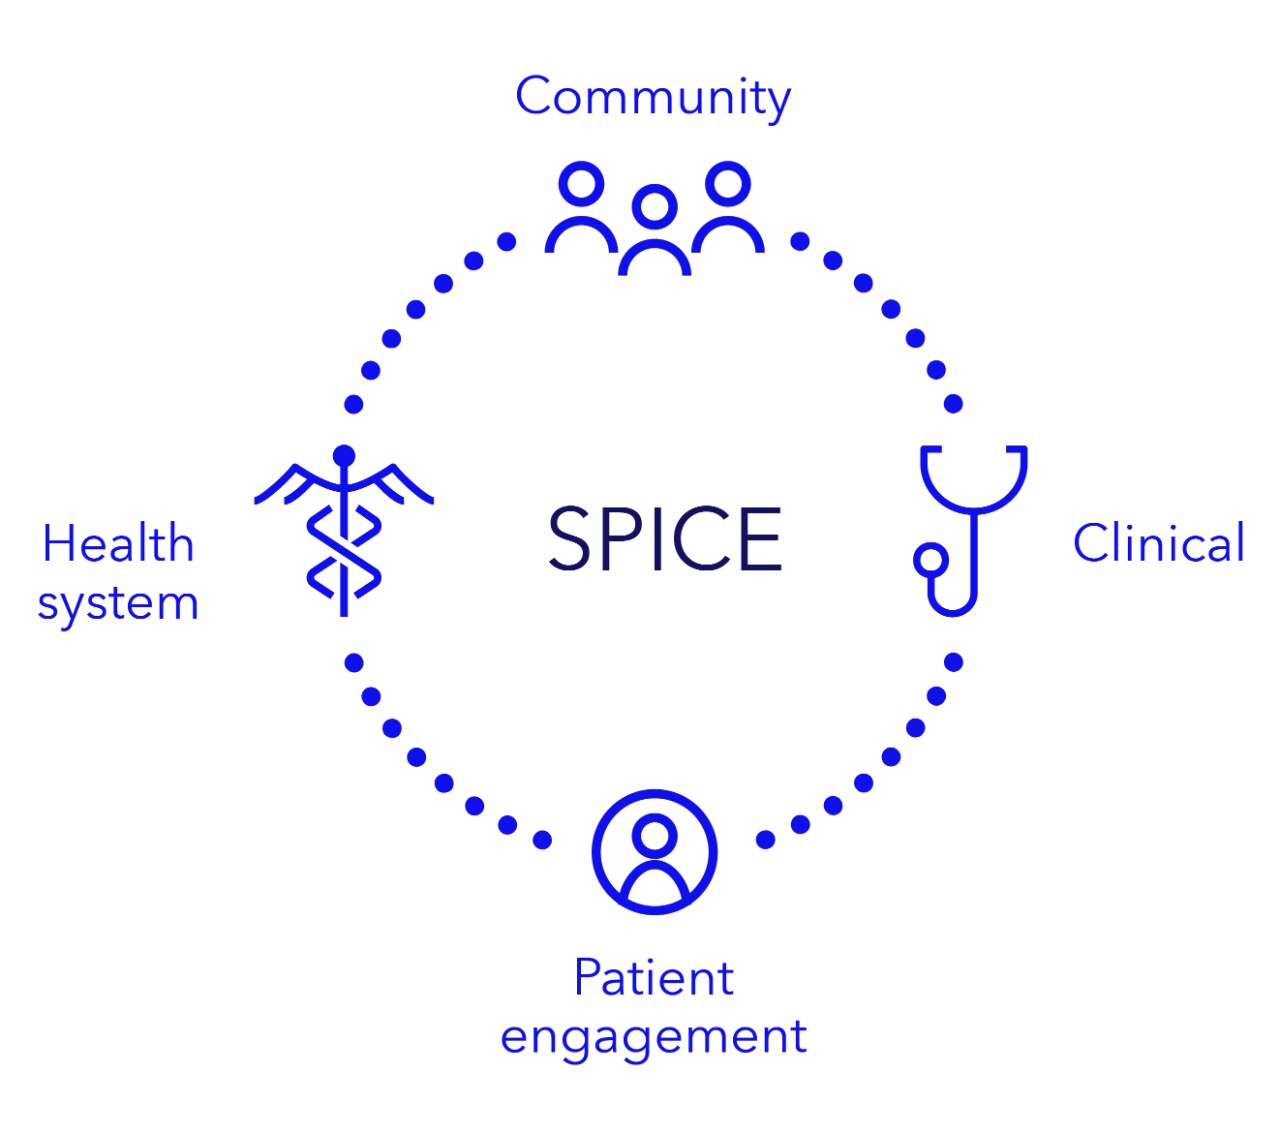 SPICE technology at the center of Community, Clinical, Patient engagement, and Health system